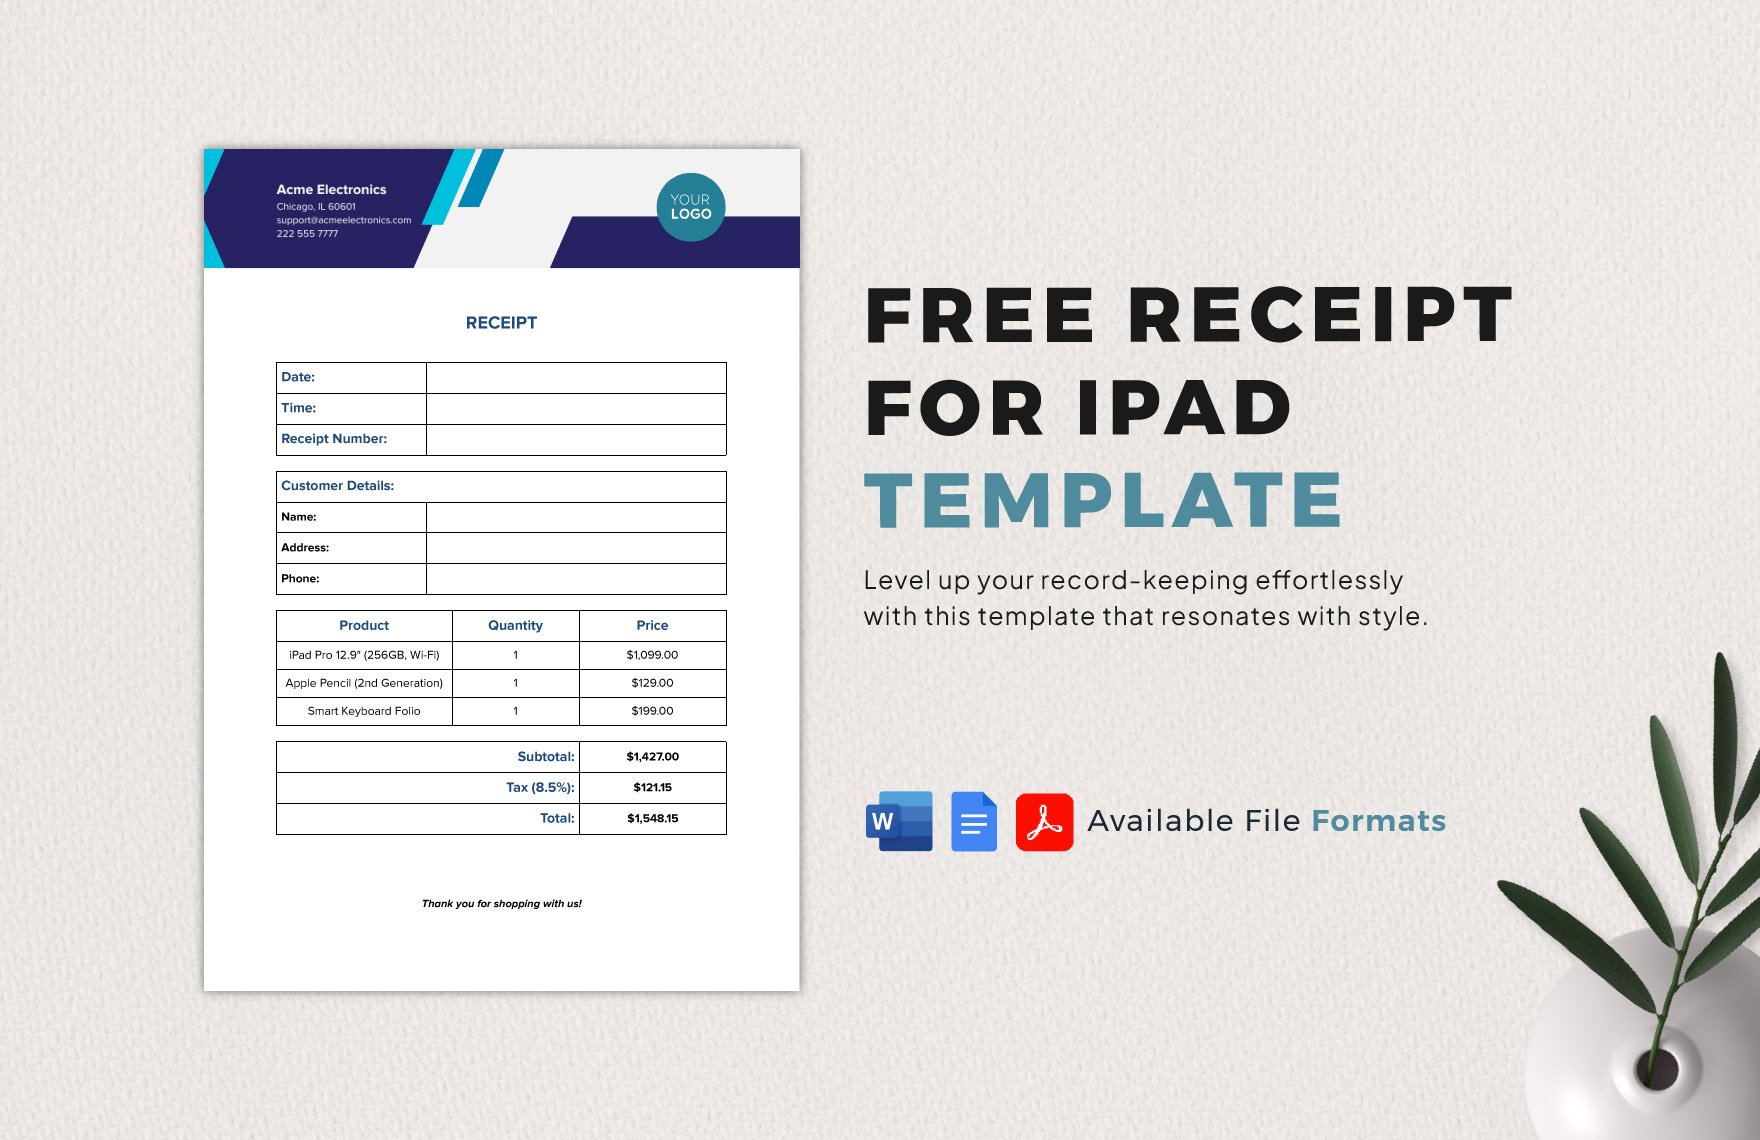 Receipt for iPad Template